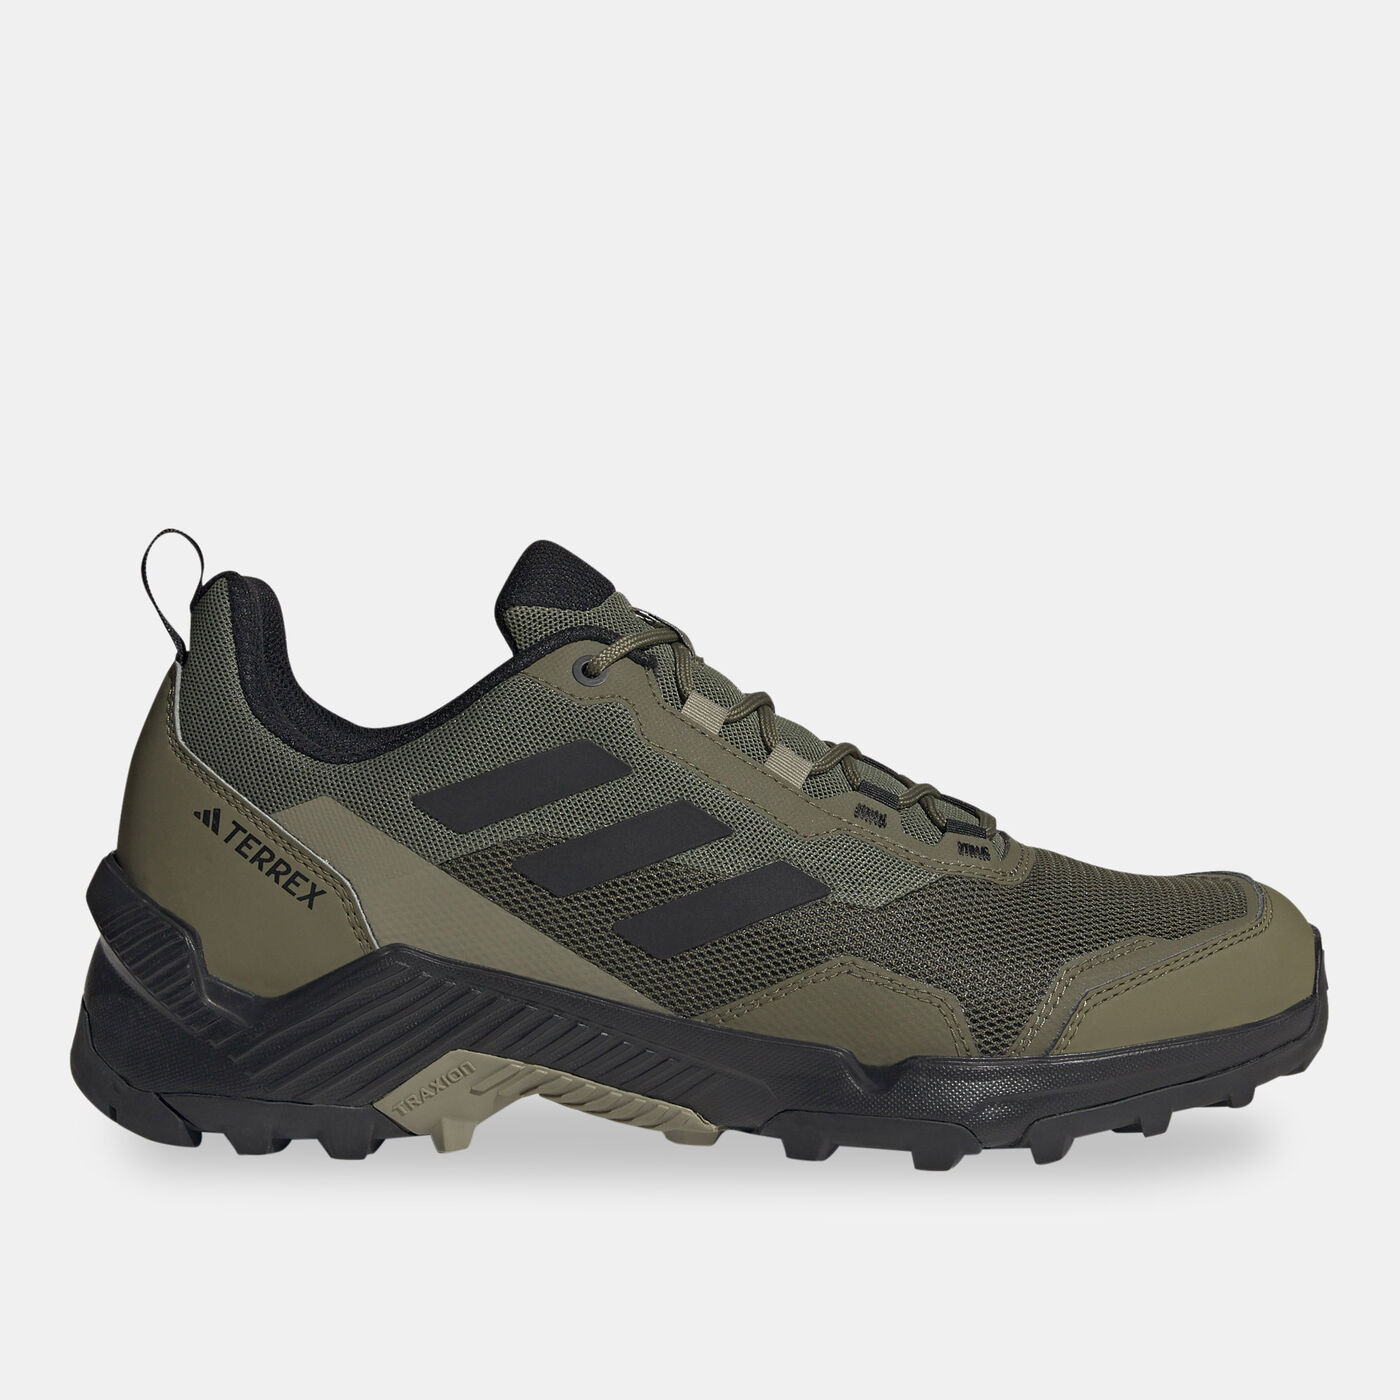 Men's Eastrail 2.0 Hiking Shoes